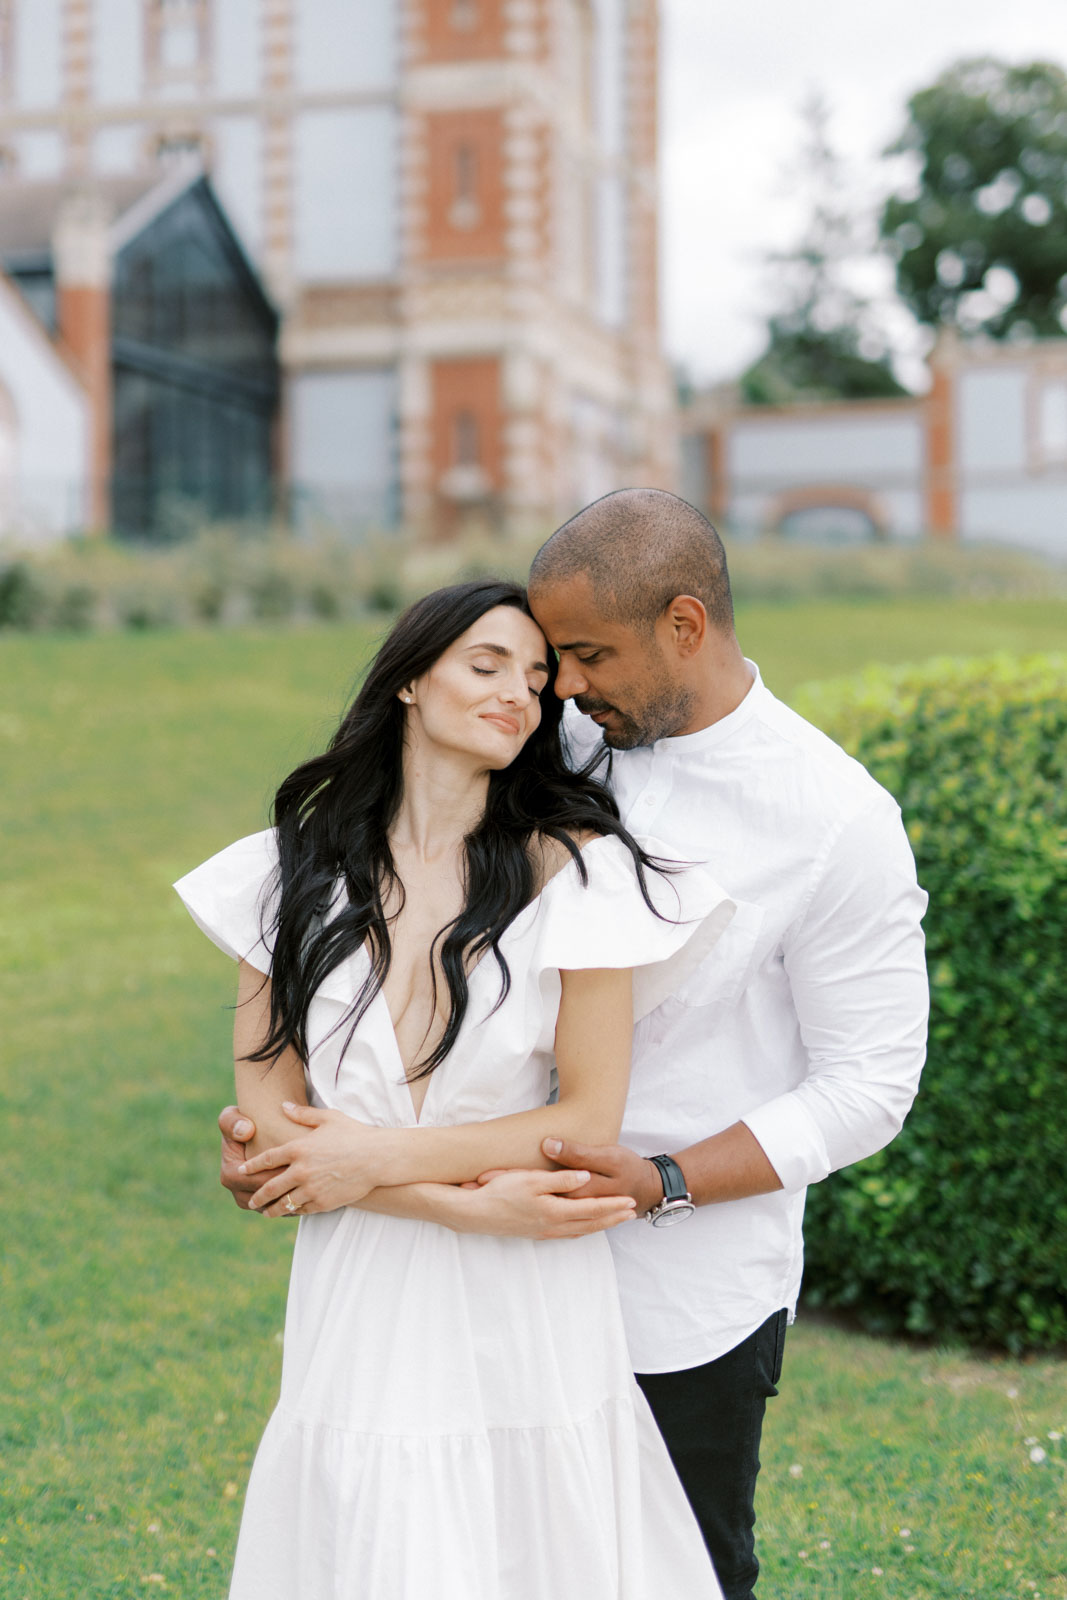 Engagement Session Champagne France Wineries | Chernogorov Photography